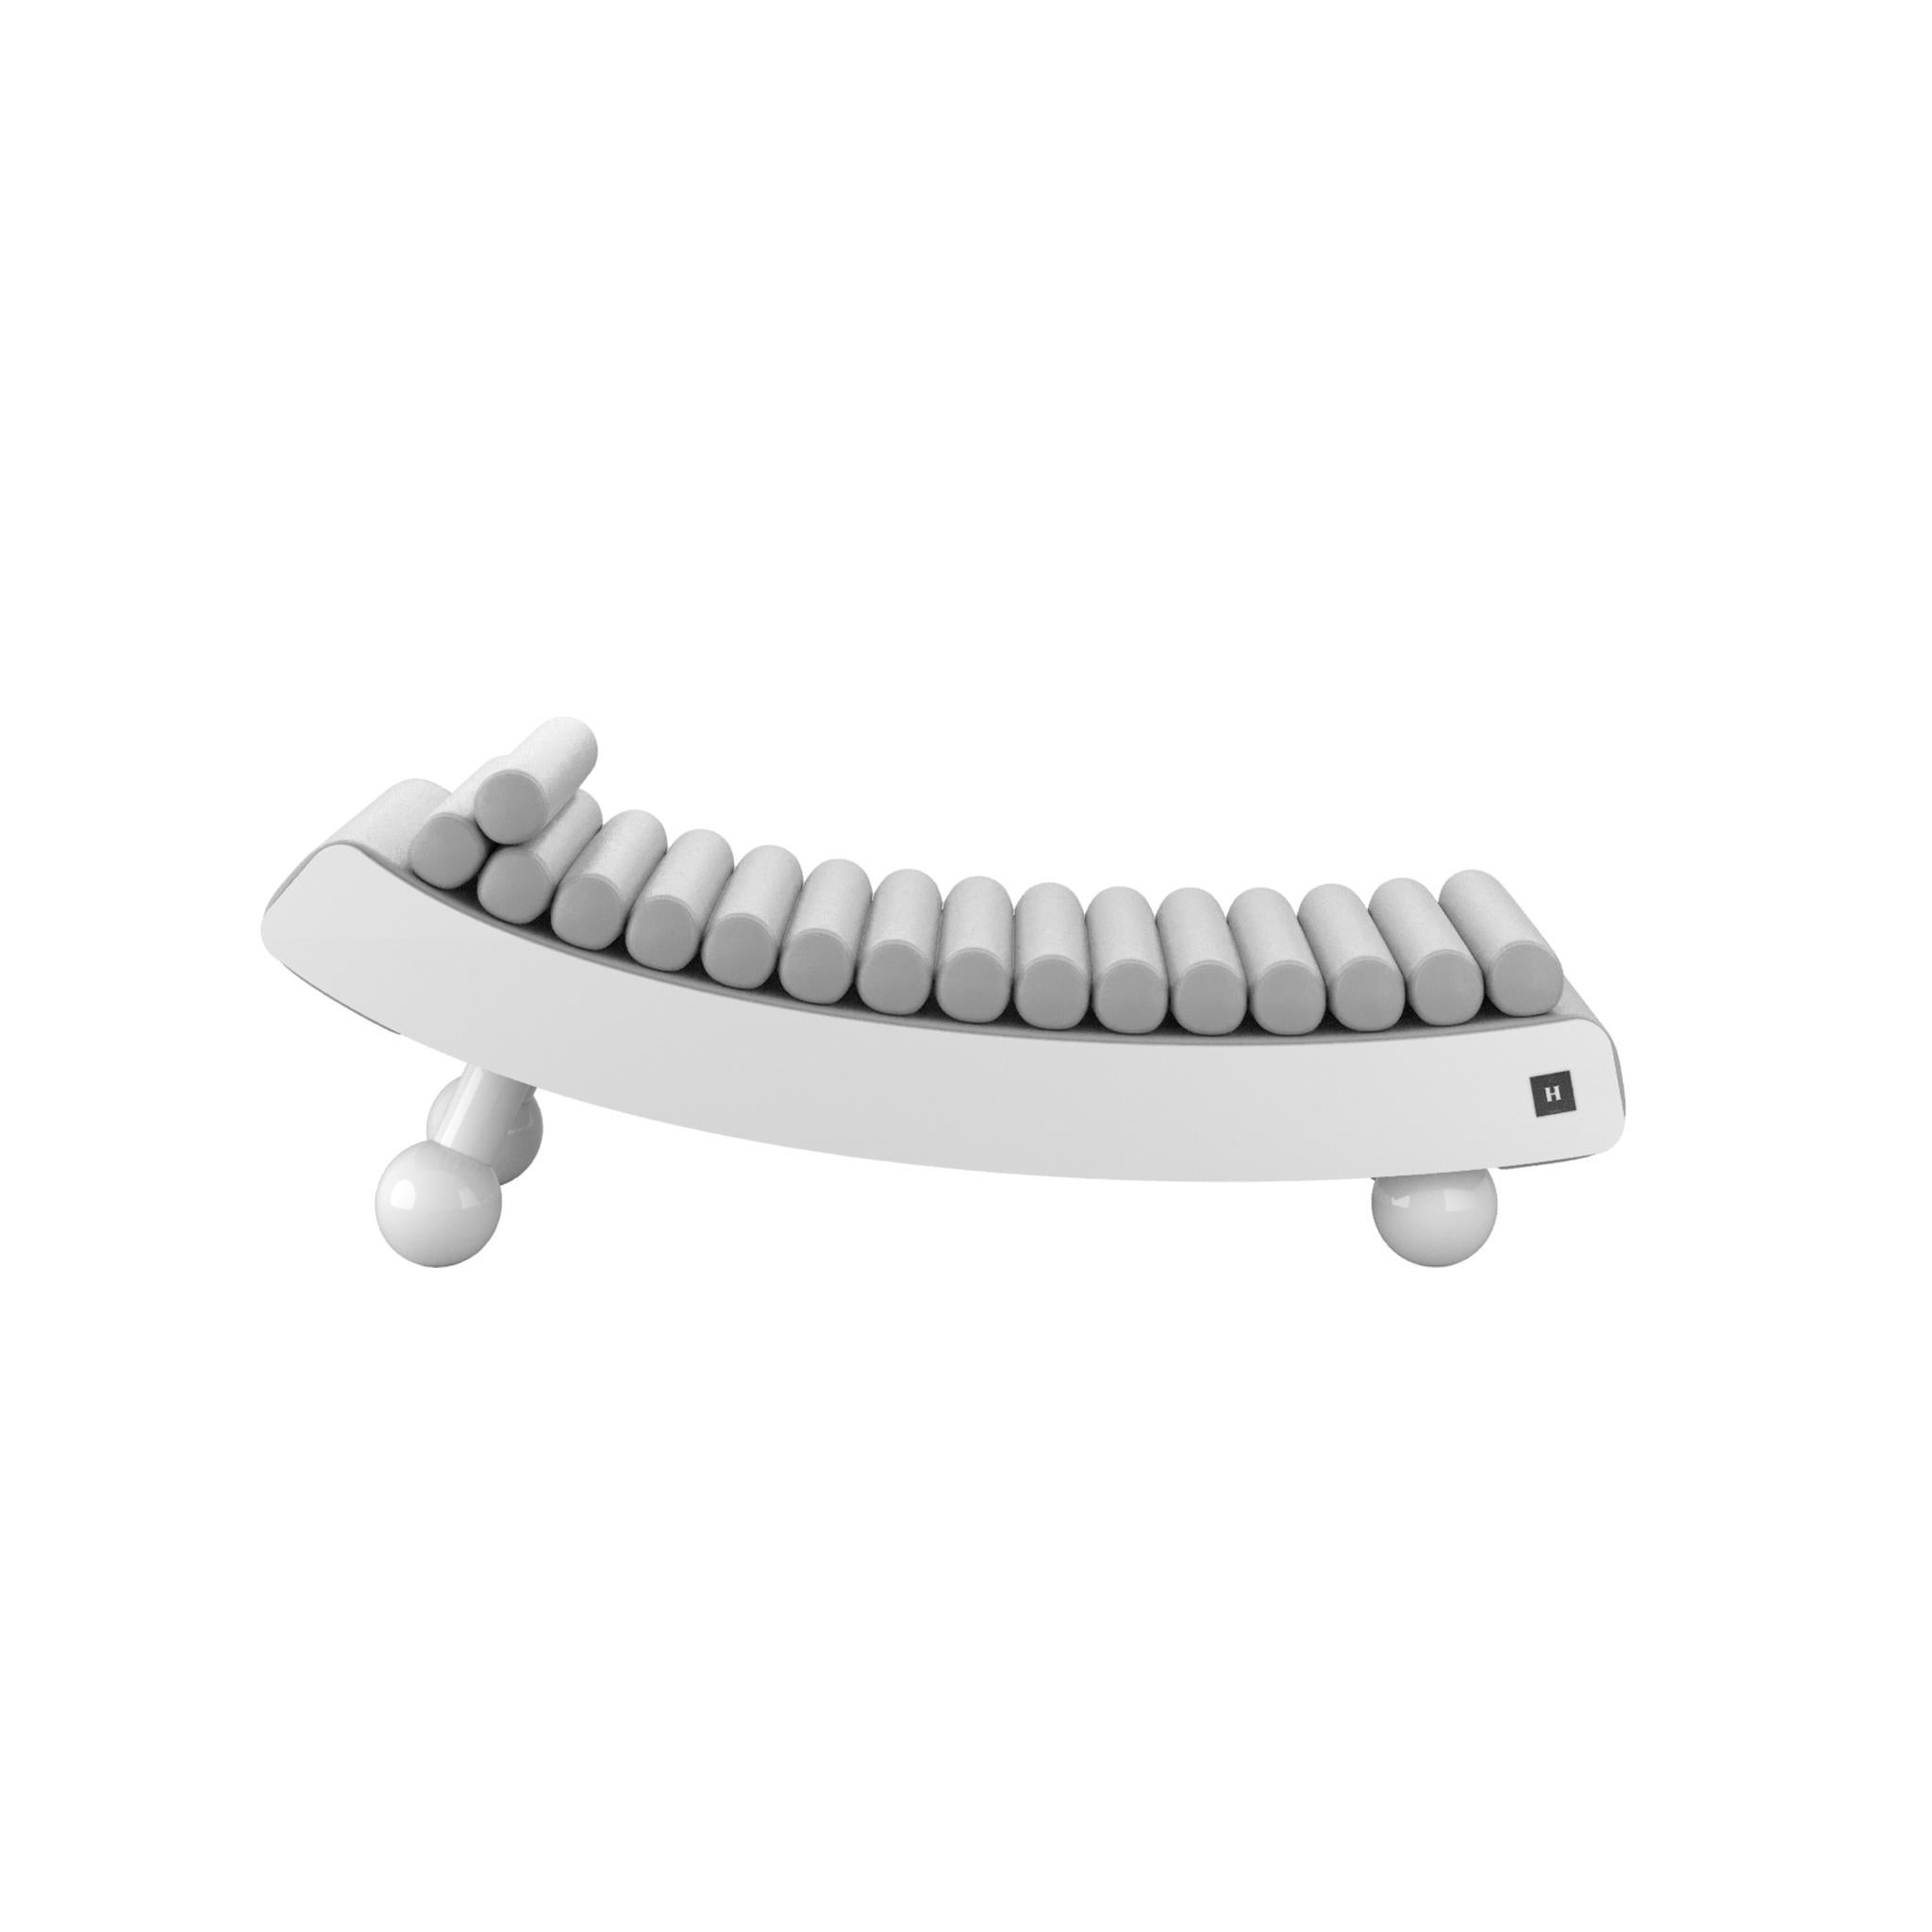 21th Century Modern Outdoor Daybed Sun Lounger in Cream
Mykonos Daybed the perfect outdoor furniture piece. Mykonos is your summer romance. The curvy and opulent shapes of the sunbed will seduce you and lead you to a bohemian lifestyle.
You feel